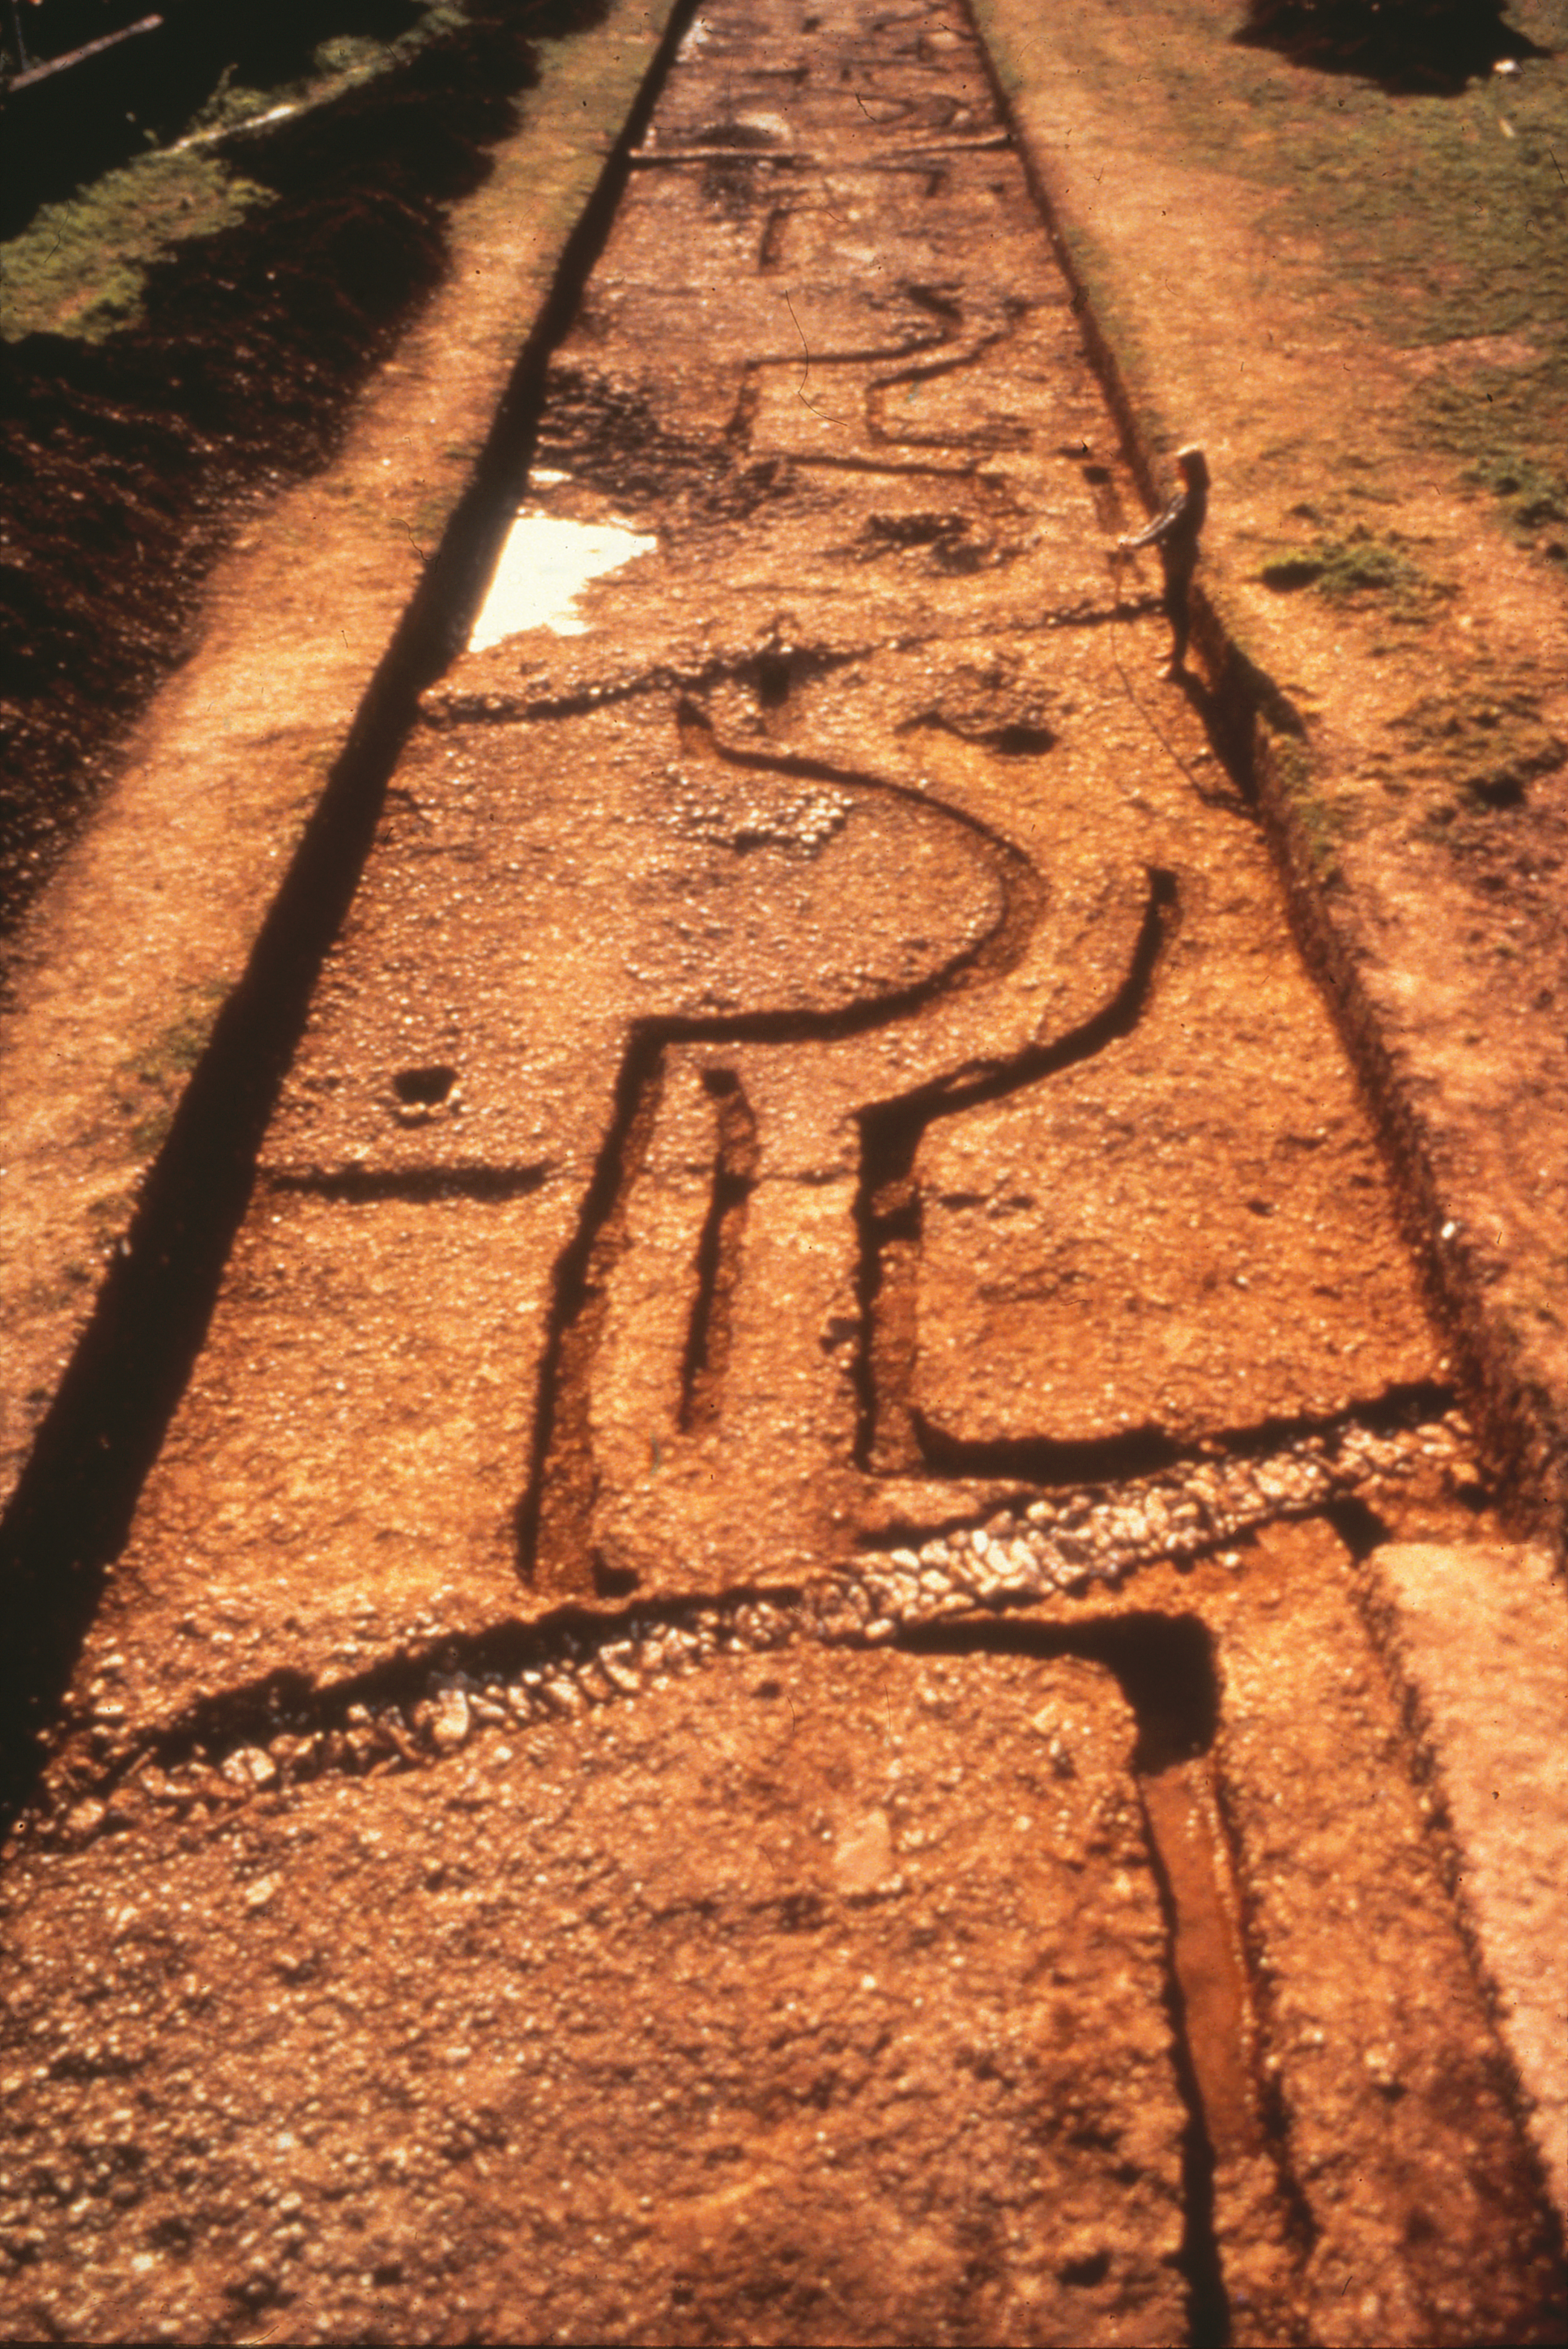 Fig. 2: View of formal garden excavation. Photo courtesy of David Rudkin for Fishbourne Roman Palace.